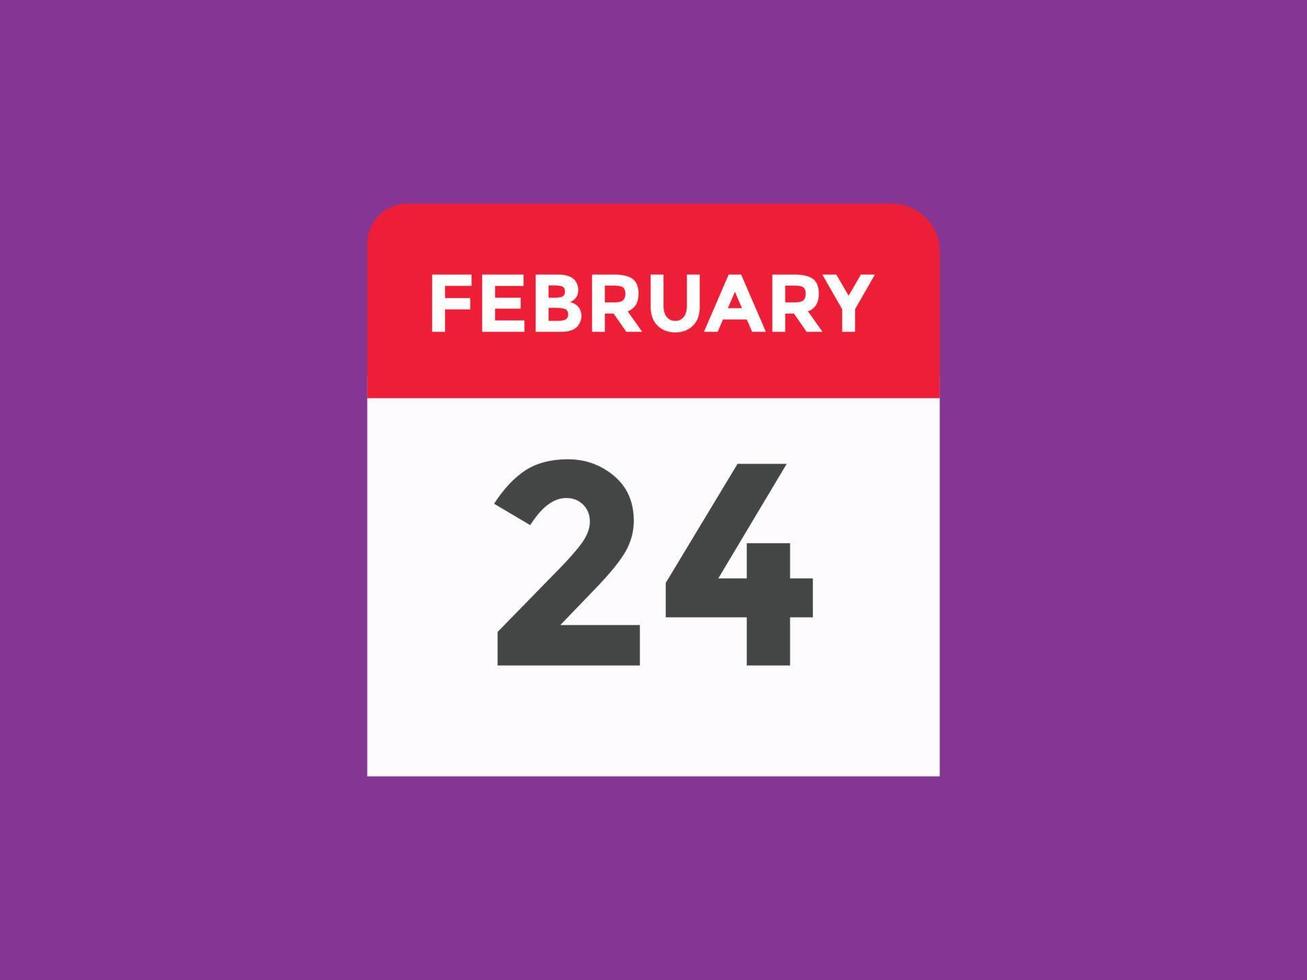 february 24 calendar reminder. 24th february daily calendar icon template. Calendar 24th february icon Design template. Vector illustration